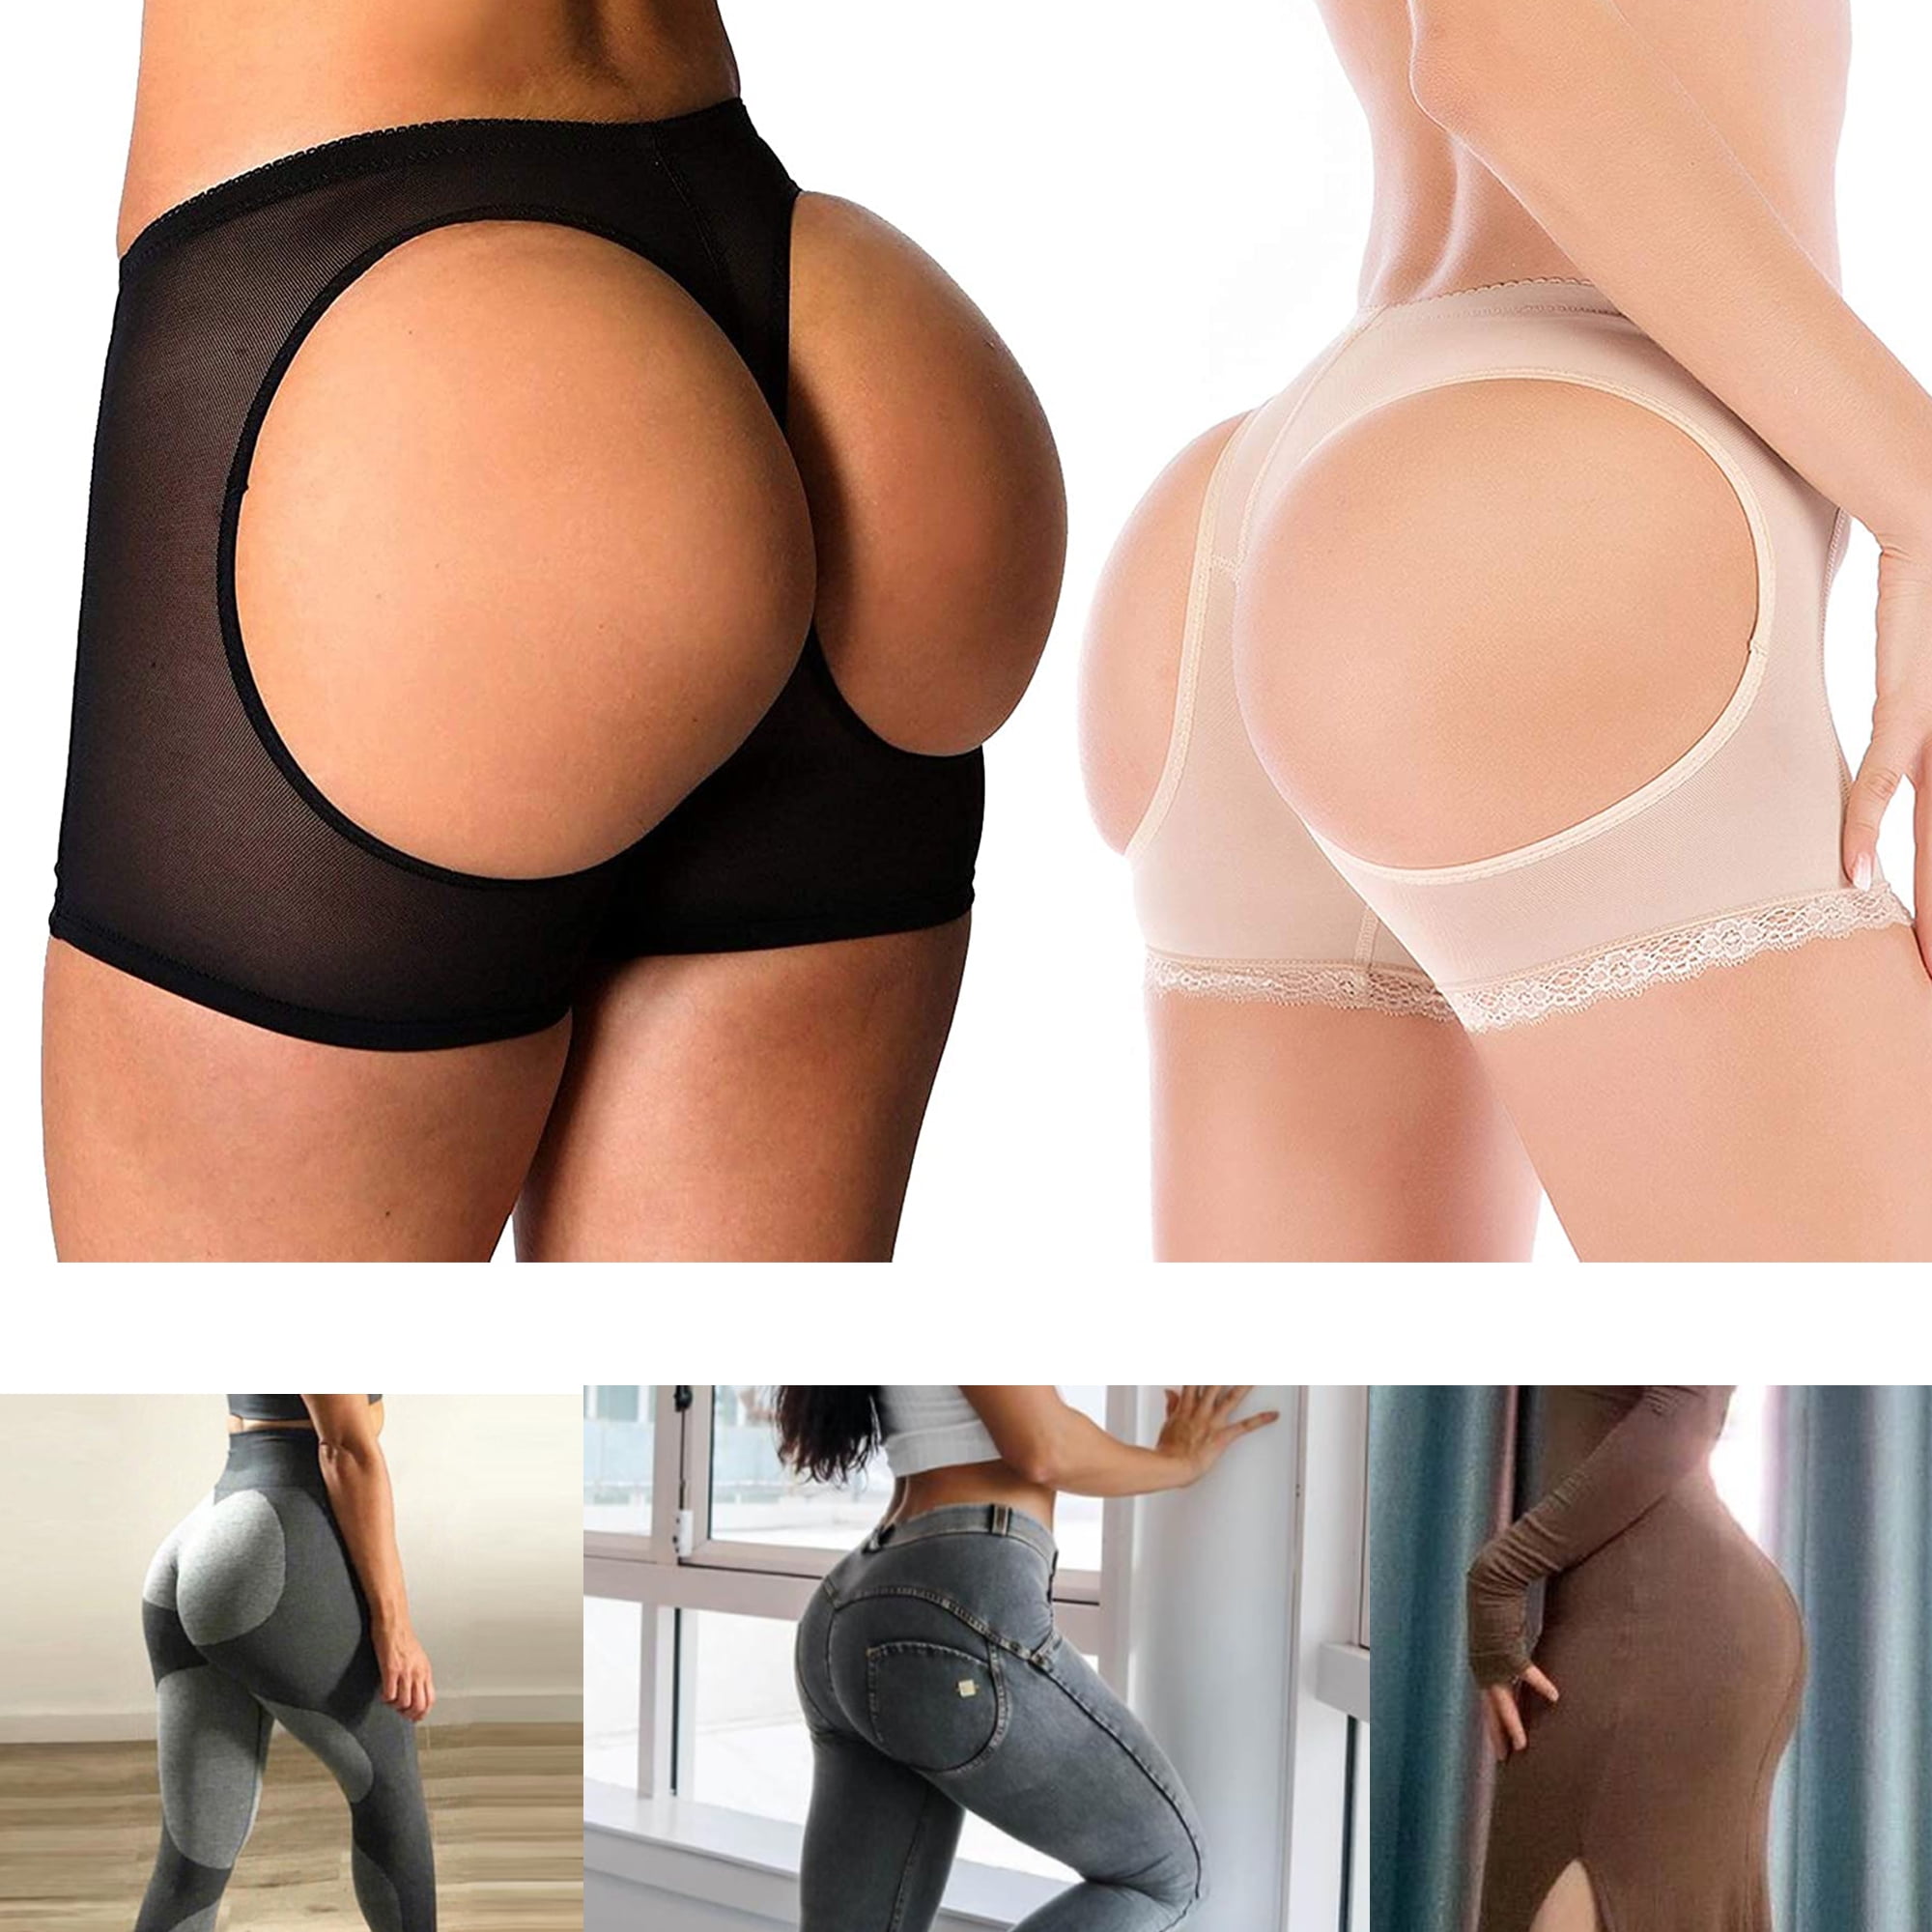 QCOTNG Butt Lifter Panties Padded Underwear for Women Removable Padding  Seamless Booty Pads Hip Enhancer Panty Black at Amazon Women's Clothing  store